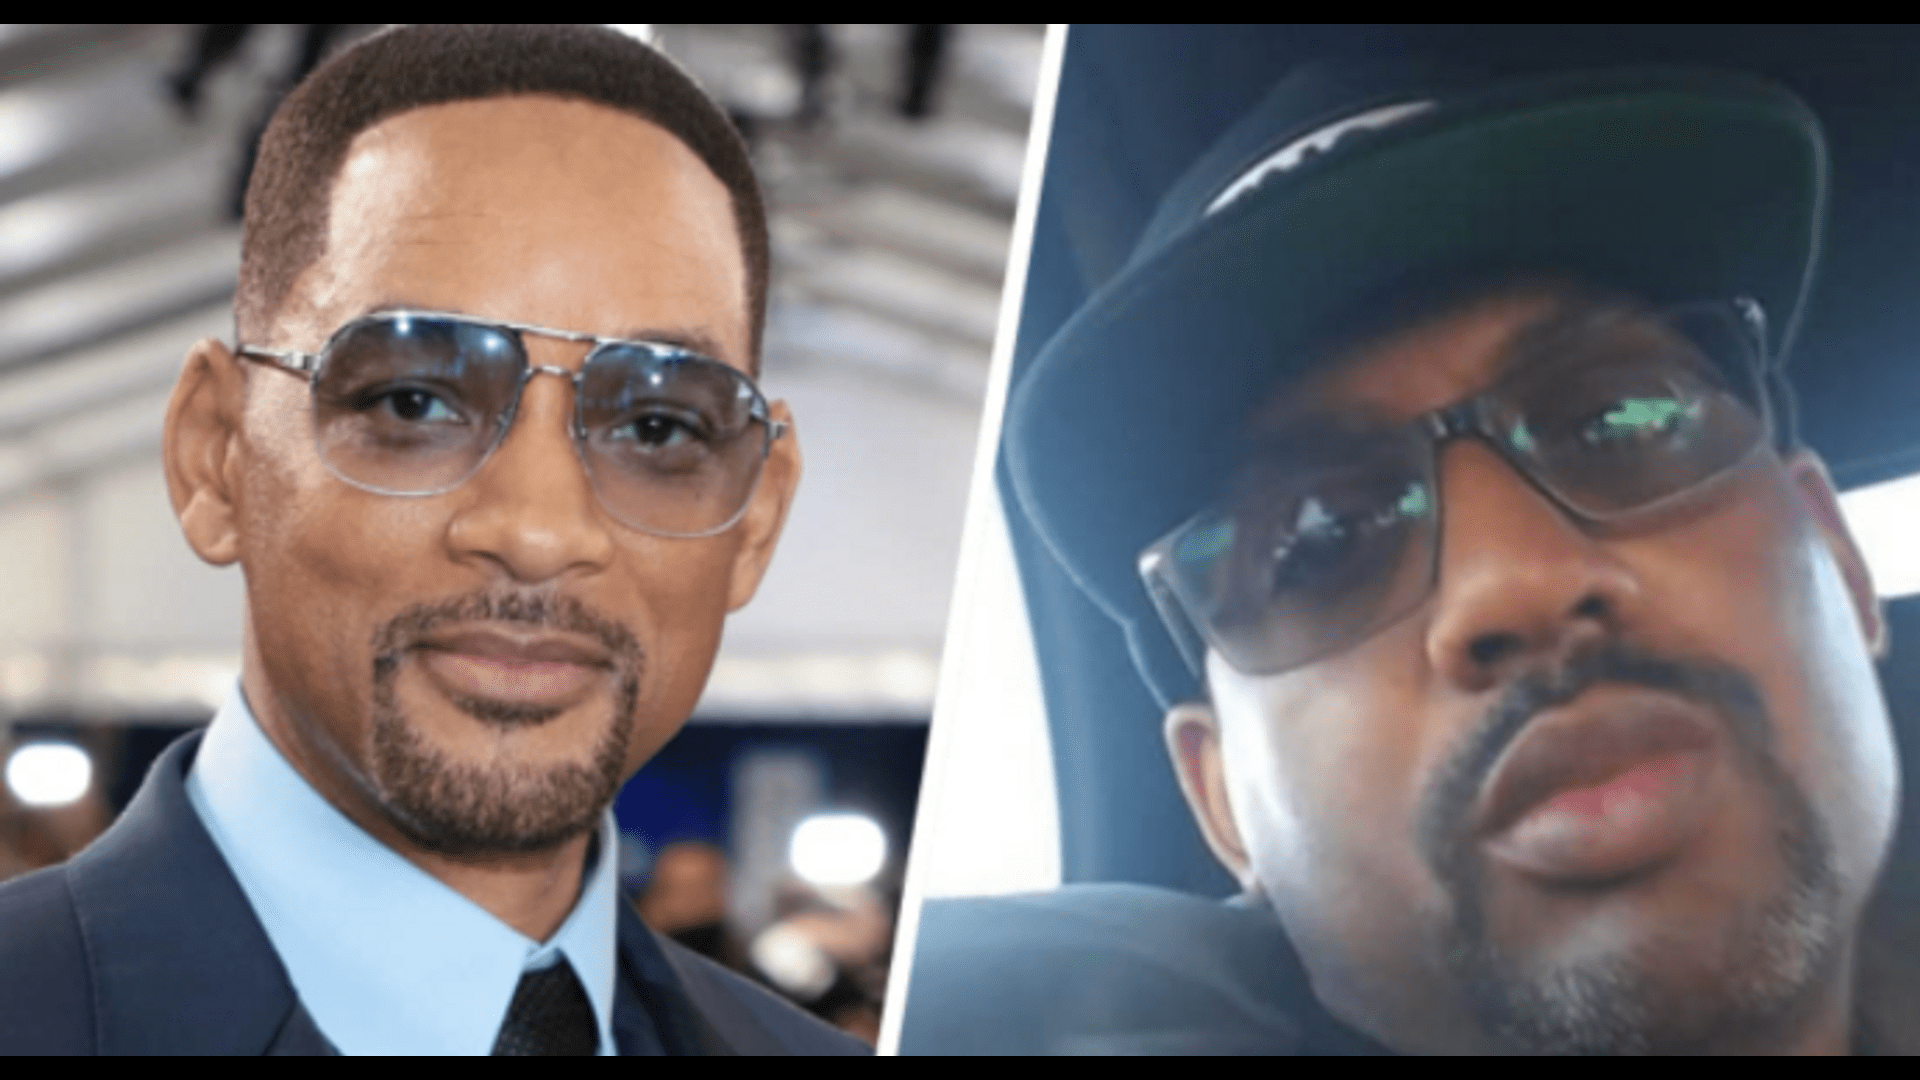 Chris Rock's brother challenged Will Smith to a fight